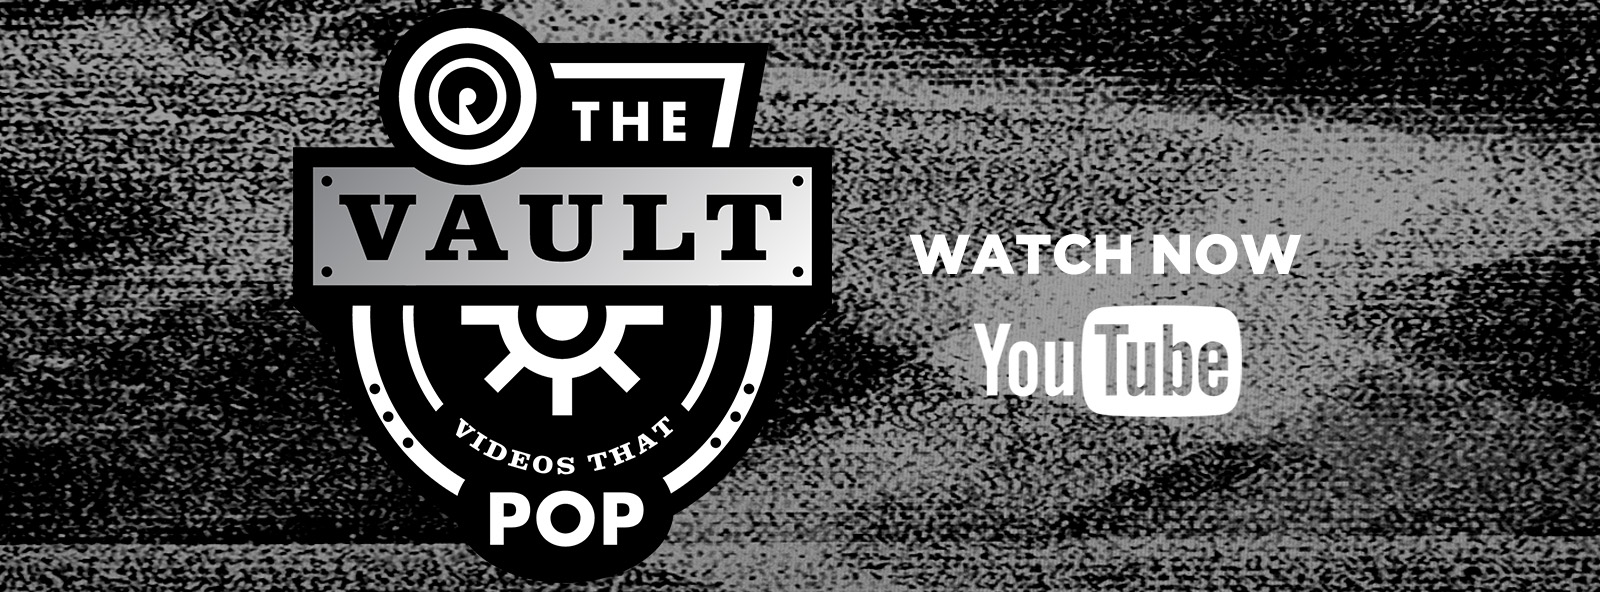 Introducing The Vault : Videos That Pop